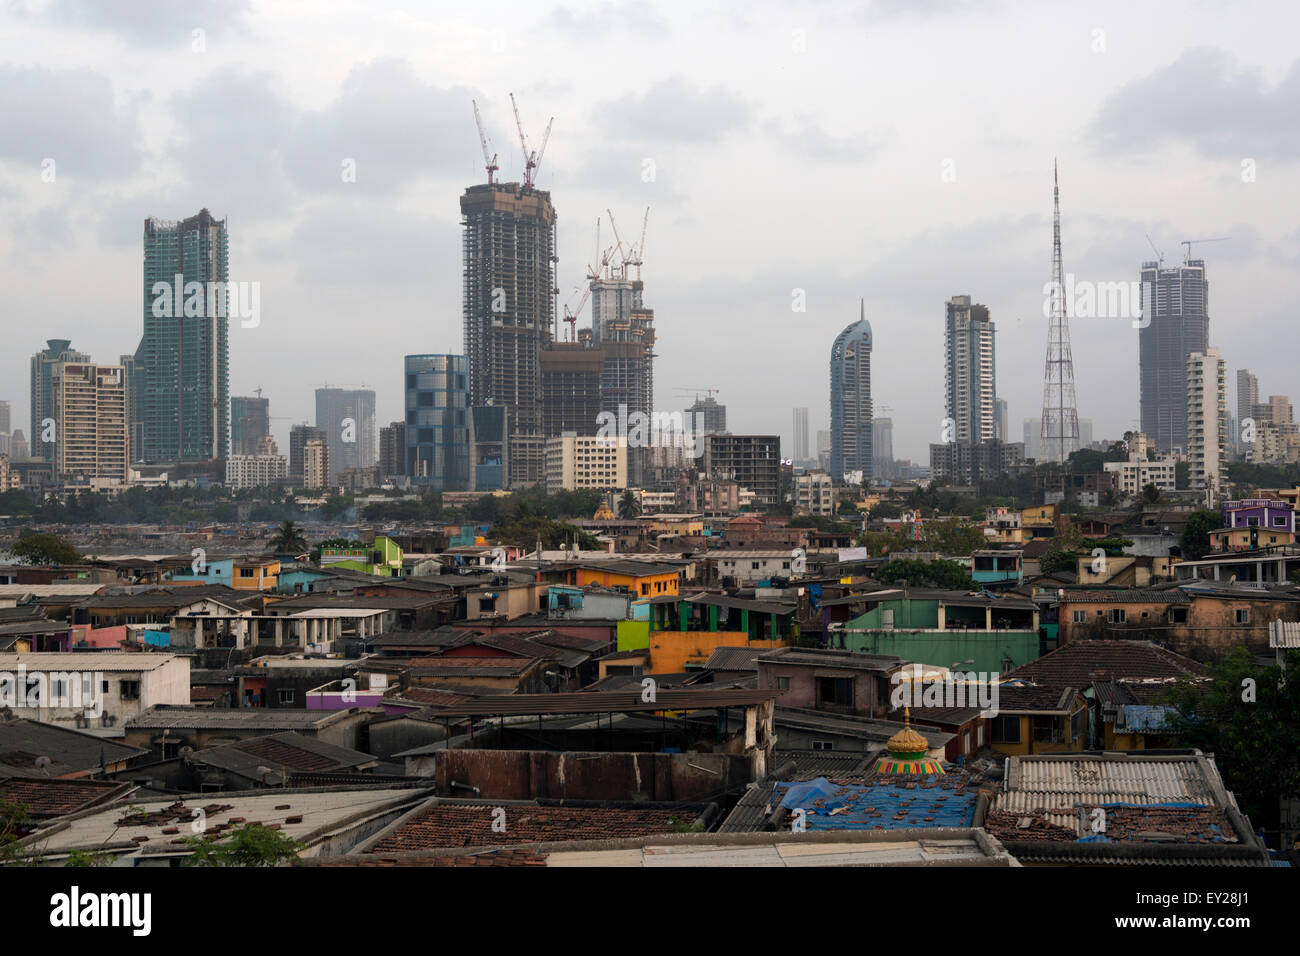 Mumbai City Skyline with Slum houses & skyscrapers highrise buildings in the background Stock Photo